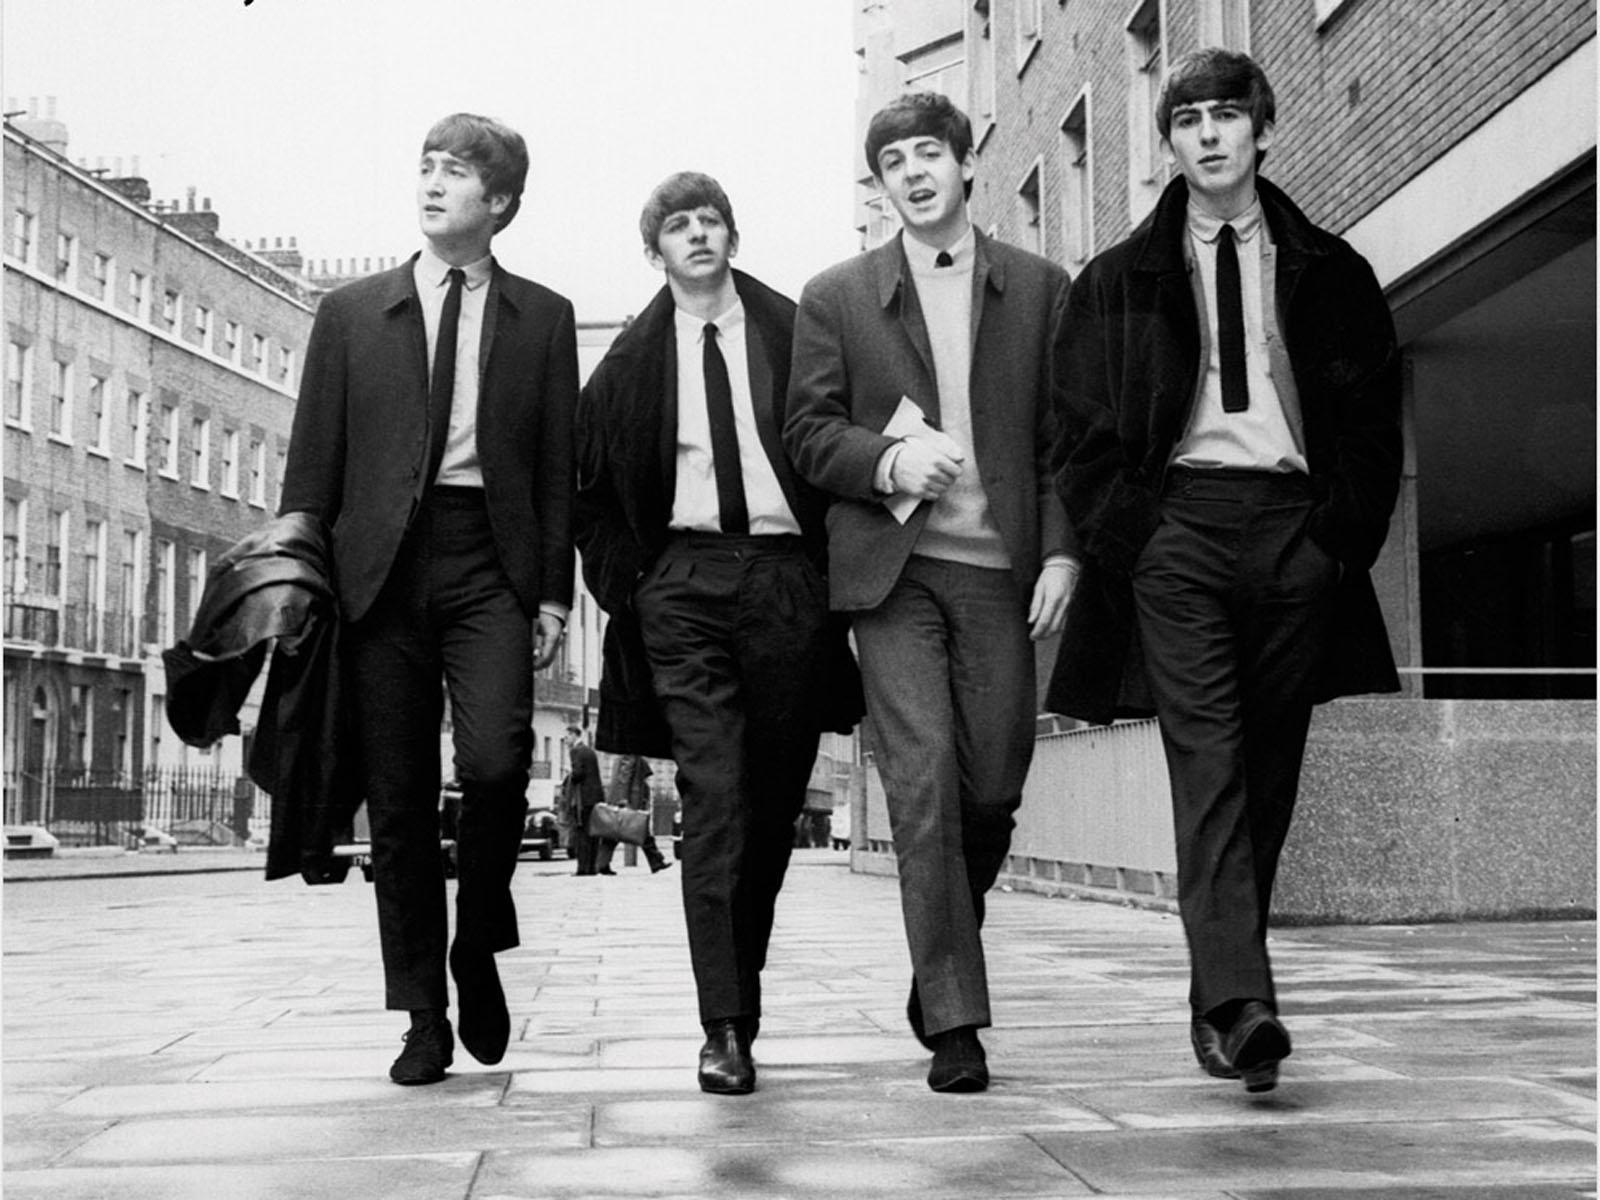 Enjoy this The Beatles background. The Beatles wallpaper